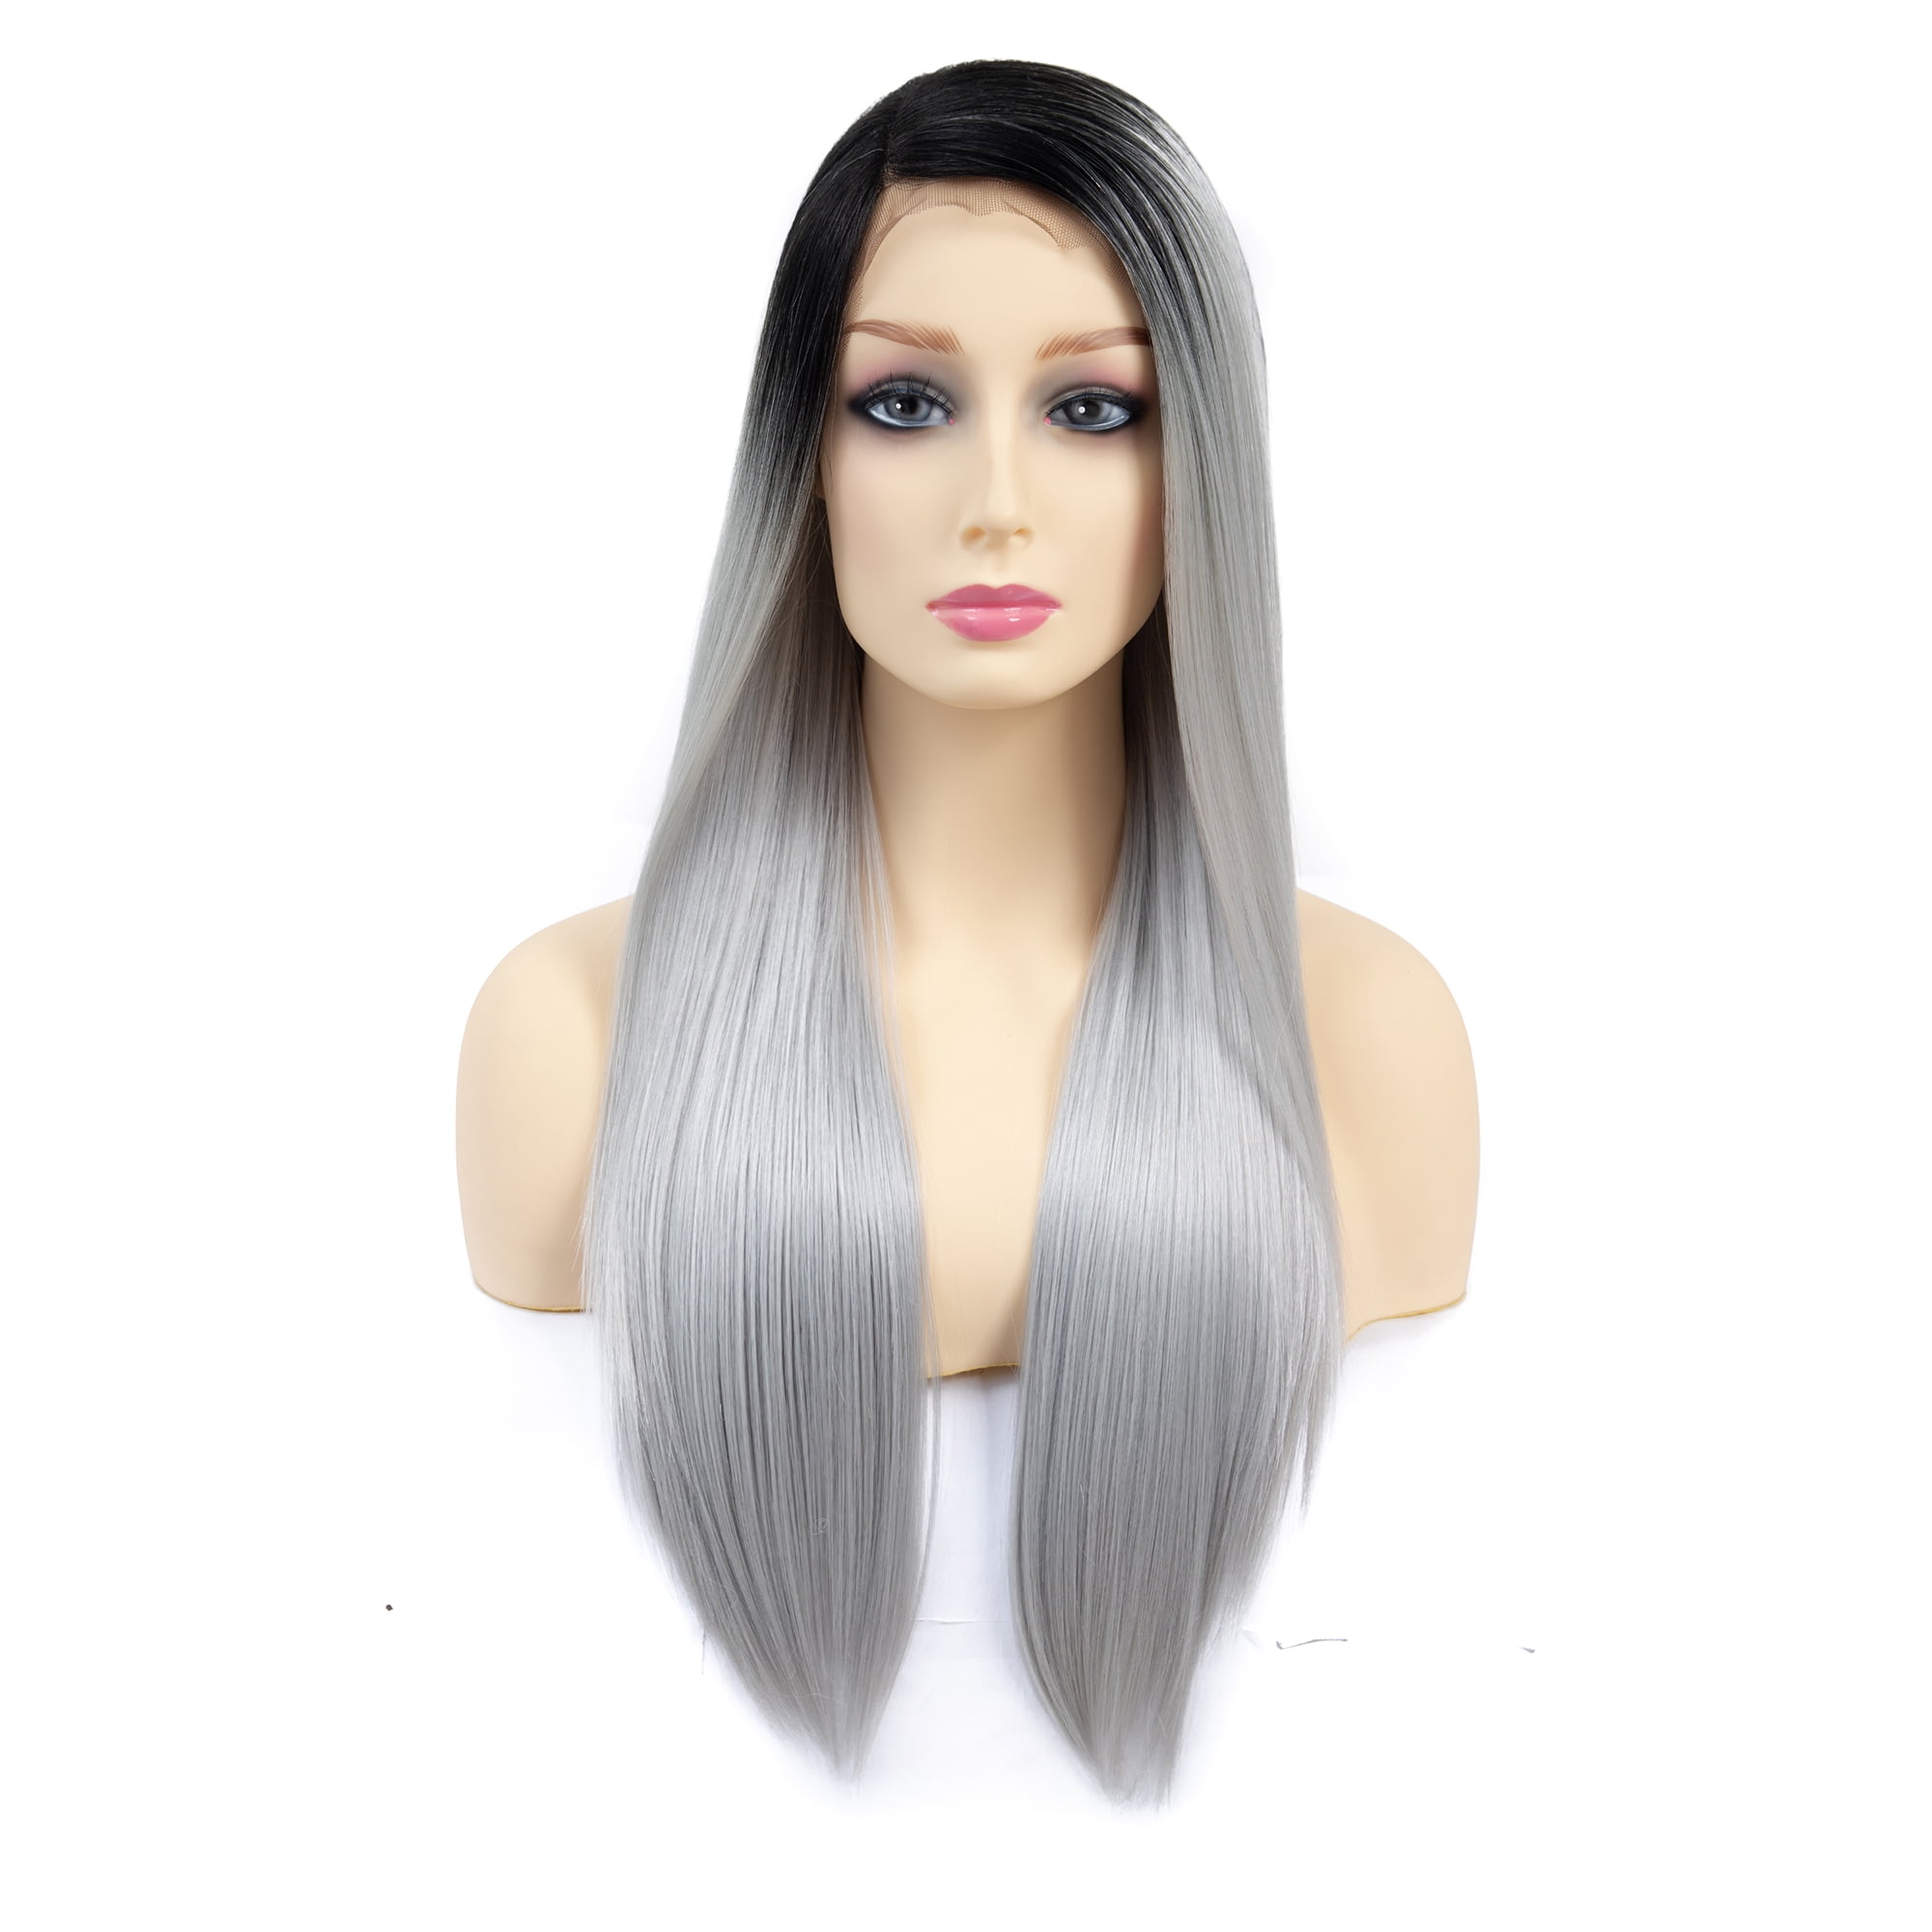 24 Inches Long Party Straight Gray Blonde Hair Women Fashion Lady Lace Front Wig